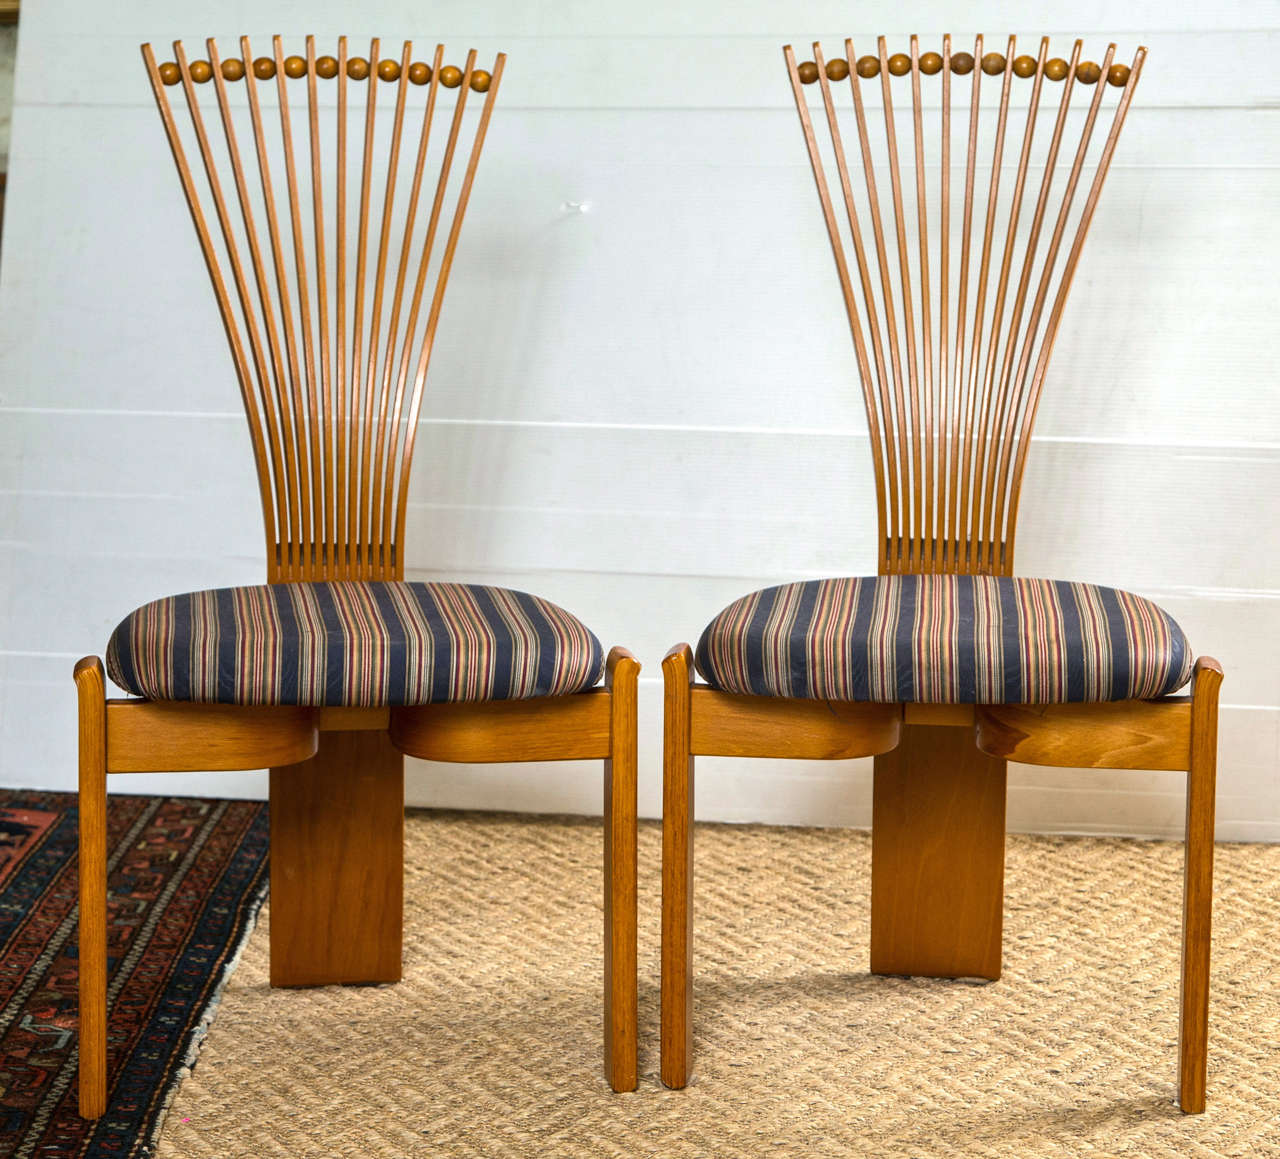 A set of mid-century modern Poly-craft Fan Back side Chairs. Each trangular bottom supporting a stripped cushion. The backs done in a fan style with spear circular divisions.